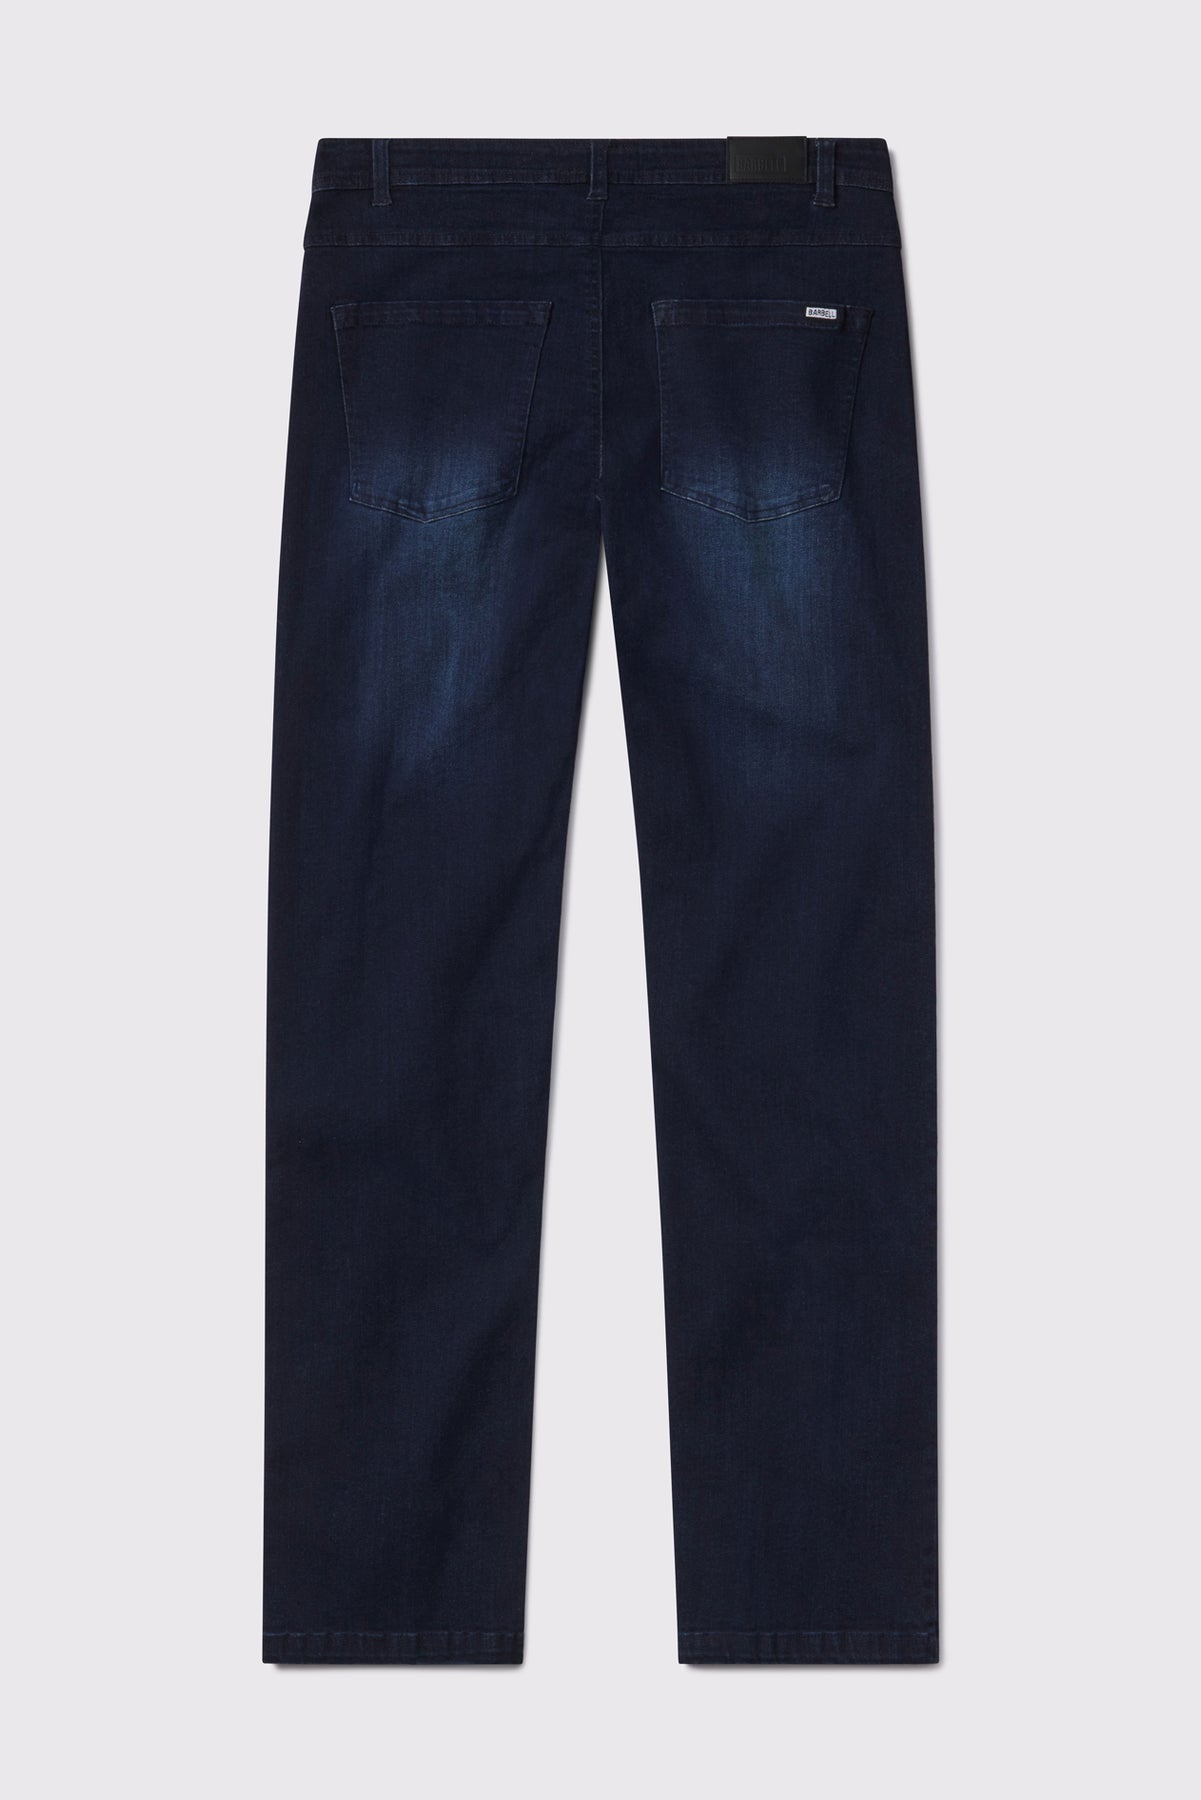 Relaxed Athletic Fit Jeans 2.0 (Tall)